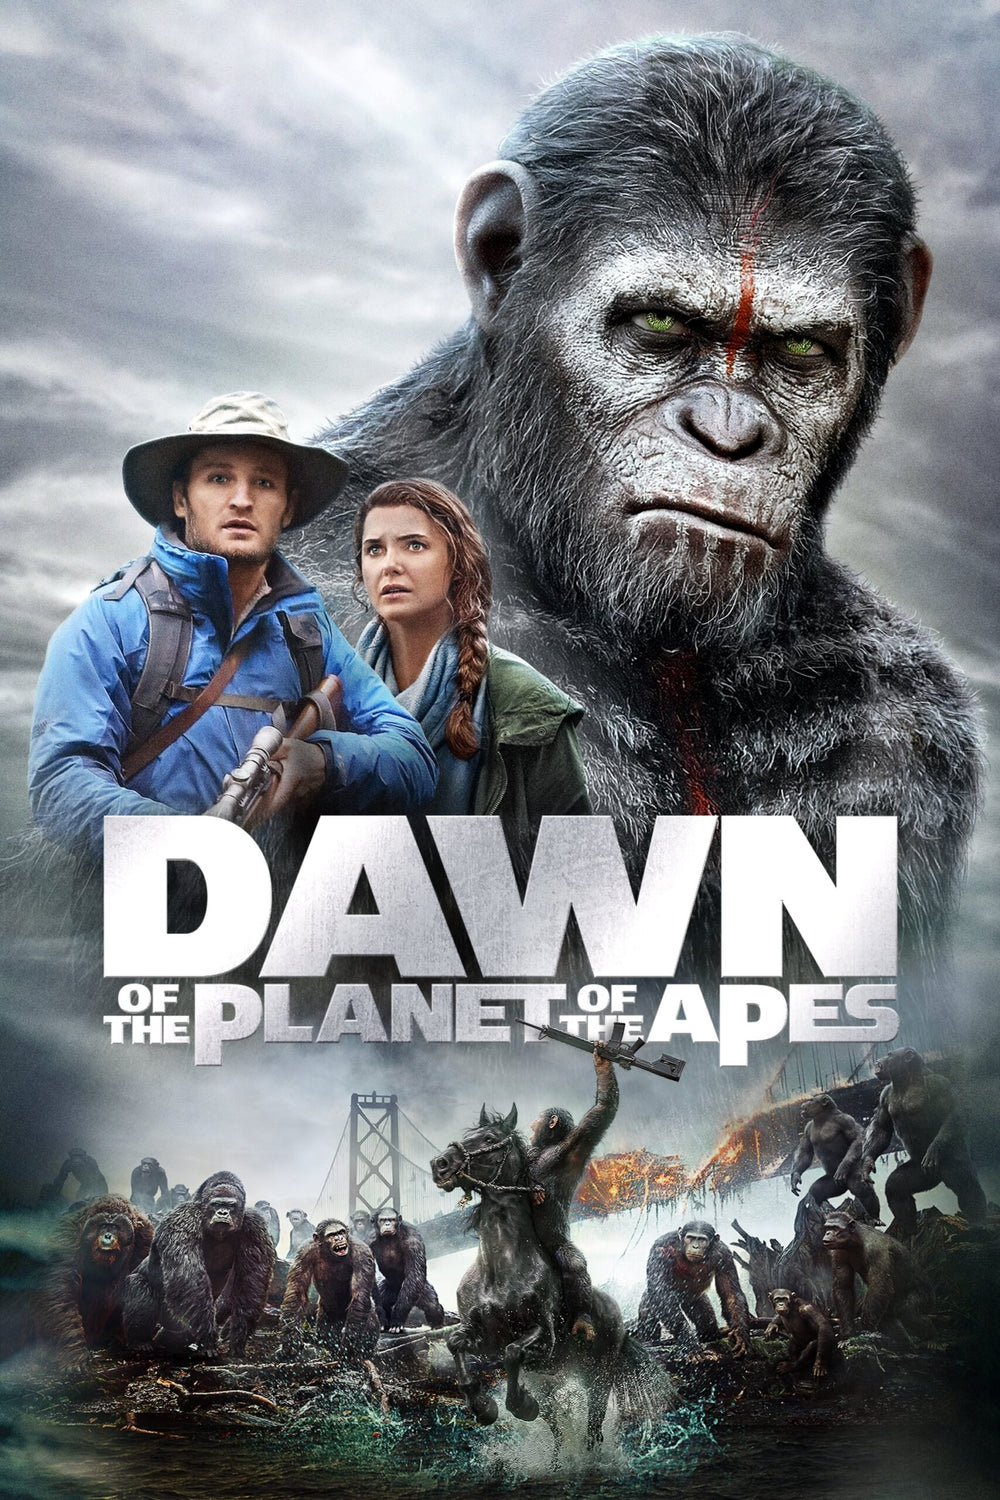 DAWN OF THE PLANET OF THE APES HD Vudu/iTunes Via Moviesanywhere